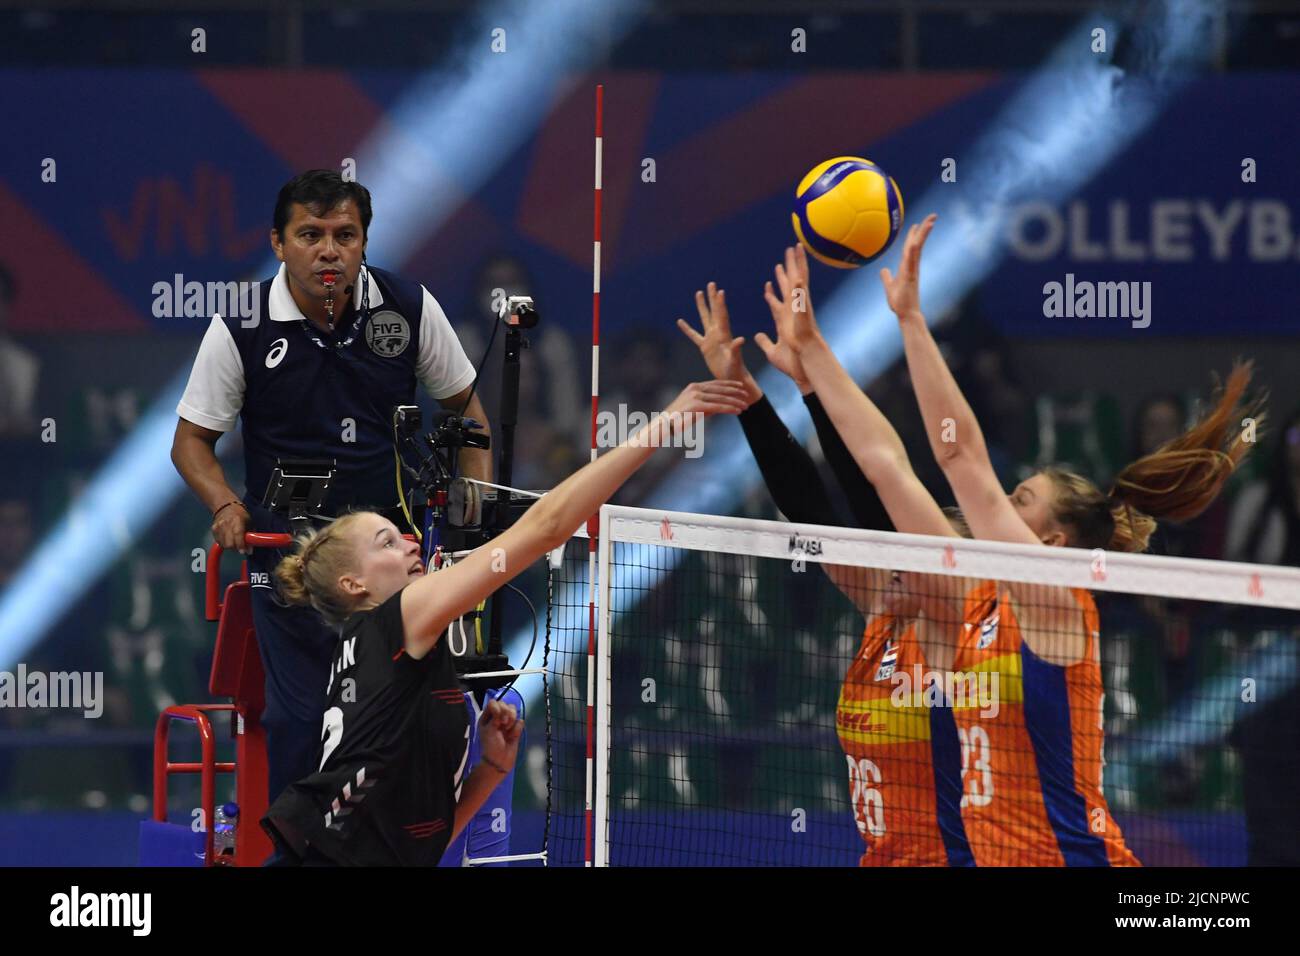 Brasilia, Brazil. 14th June, 2022. DF - Brasilia - 06/14/2022 - FEMALE NATIONS VOLLEYBALL LEAGUE NETHERLANDS X GERMANY - Hippe Saskia player from Germany attacks during a match against Netherlands at Nilson Nelson Gymnasium for the Women's Volleyball Nations League 2022. Photo: Mateus Bonomi/AGIF/Sipa USA Credit: Sipa USA/Alamy Live News Stock Photo